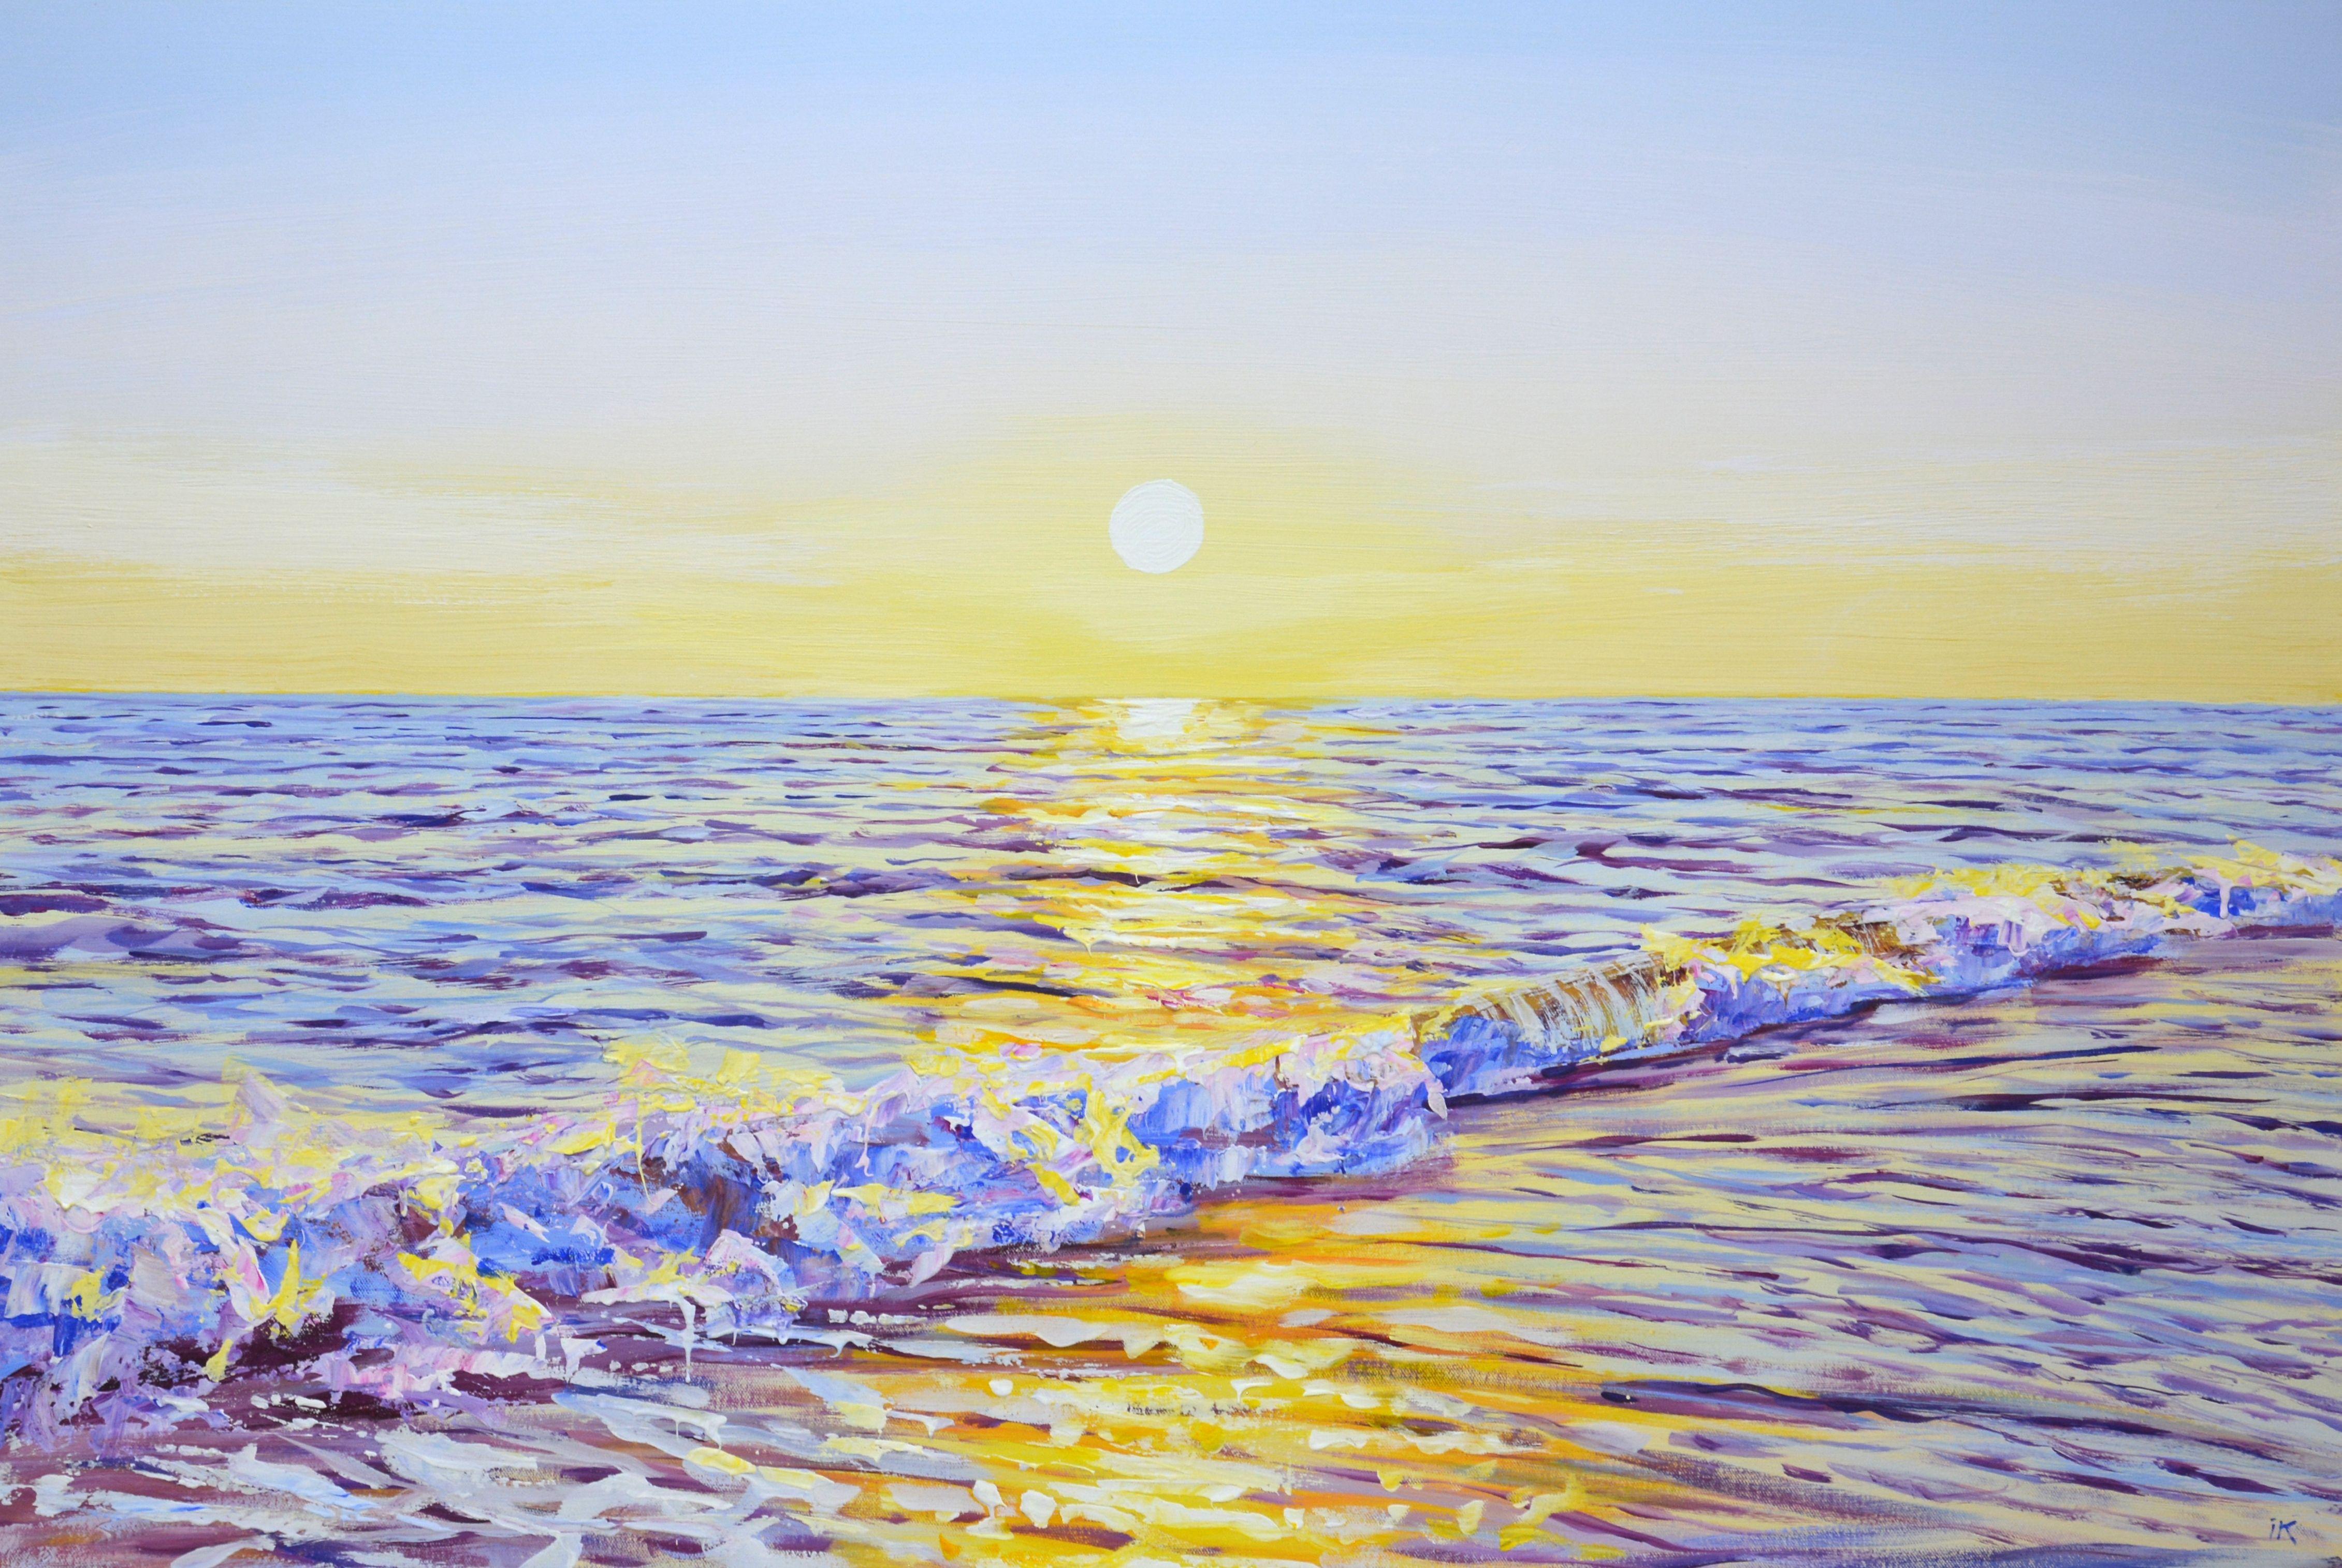 Magic sunset. Ocean. Warm water, sea, ocean, waves, sun glare on the water, clear sky, sun create an atmosphere of relaxation and romance. Light flickers on the surface of the water, creating a serene look. Made in the style of realism. Part of a